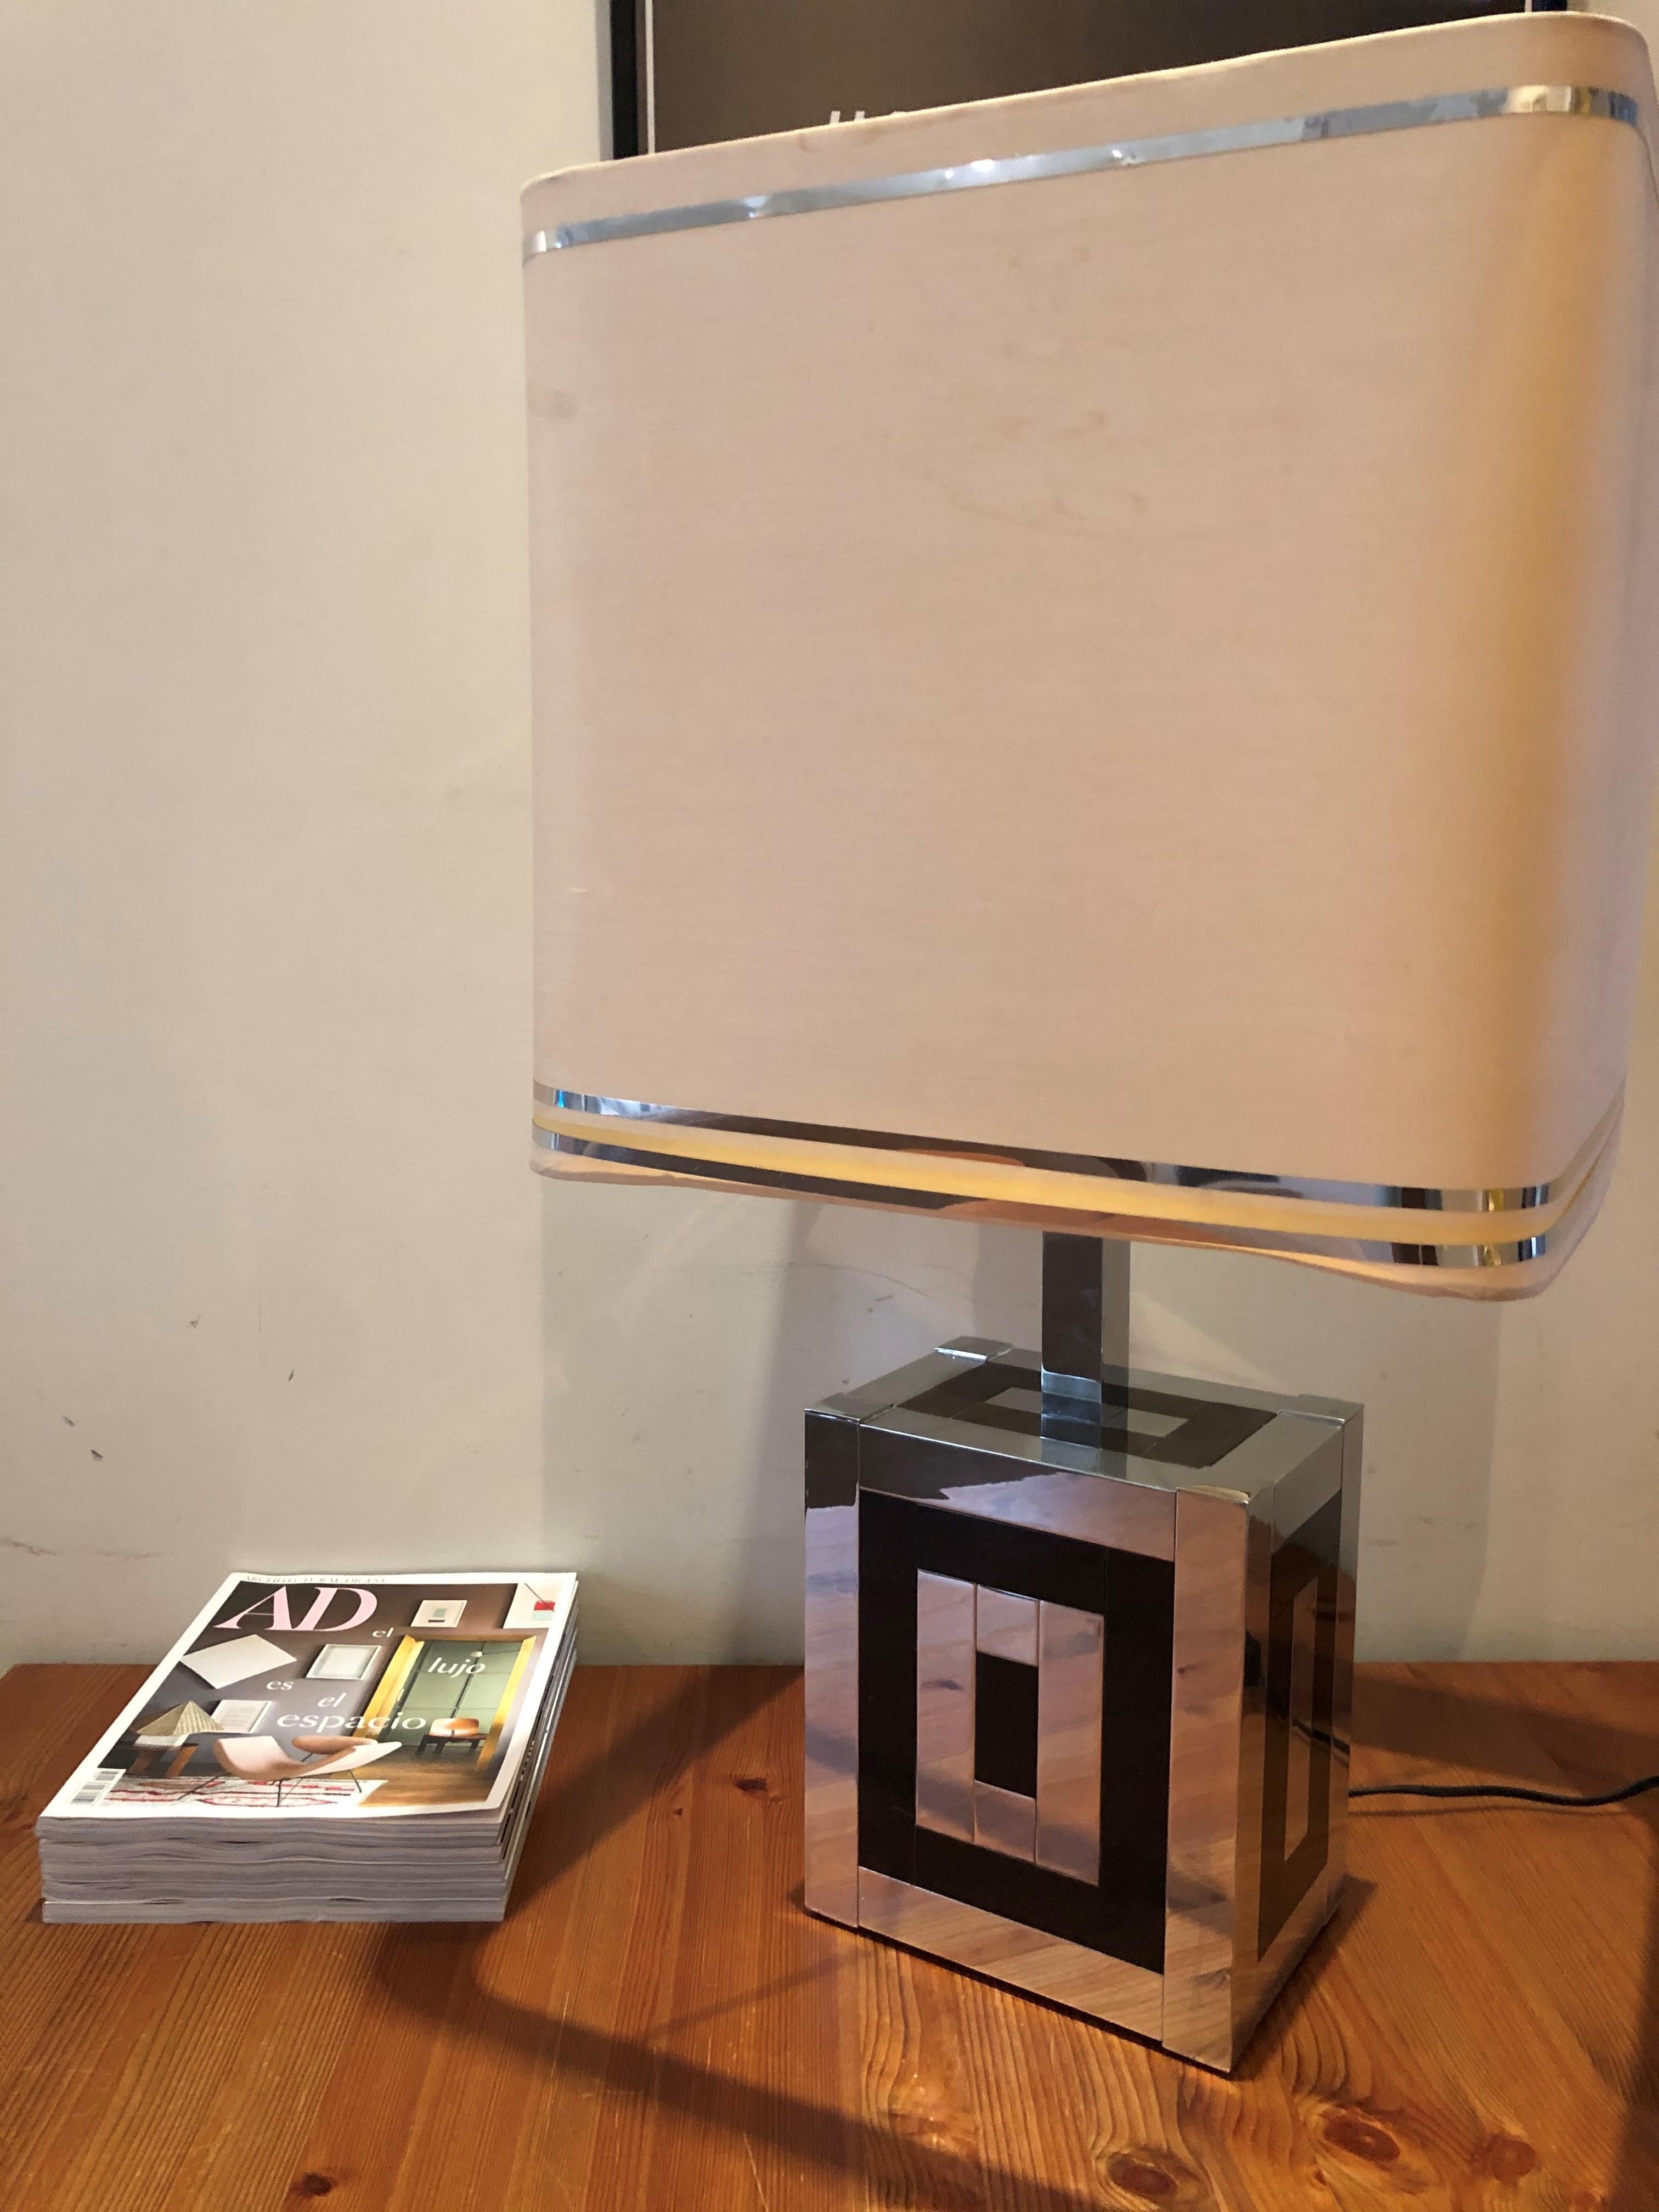 Midcentury central table lamp from 1970s. This fixture is Willy Rizzo designed and crafted during the 1970s in Barcelona by “BD Lumica”.
“BD Lumica” original label still shows on the back and on the top.
This Table Lamp is equipped with three-light